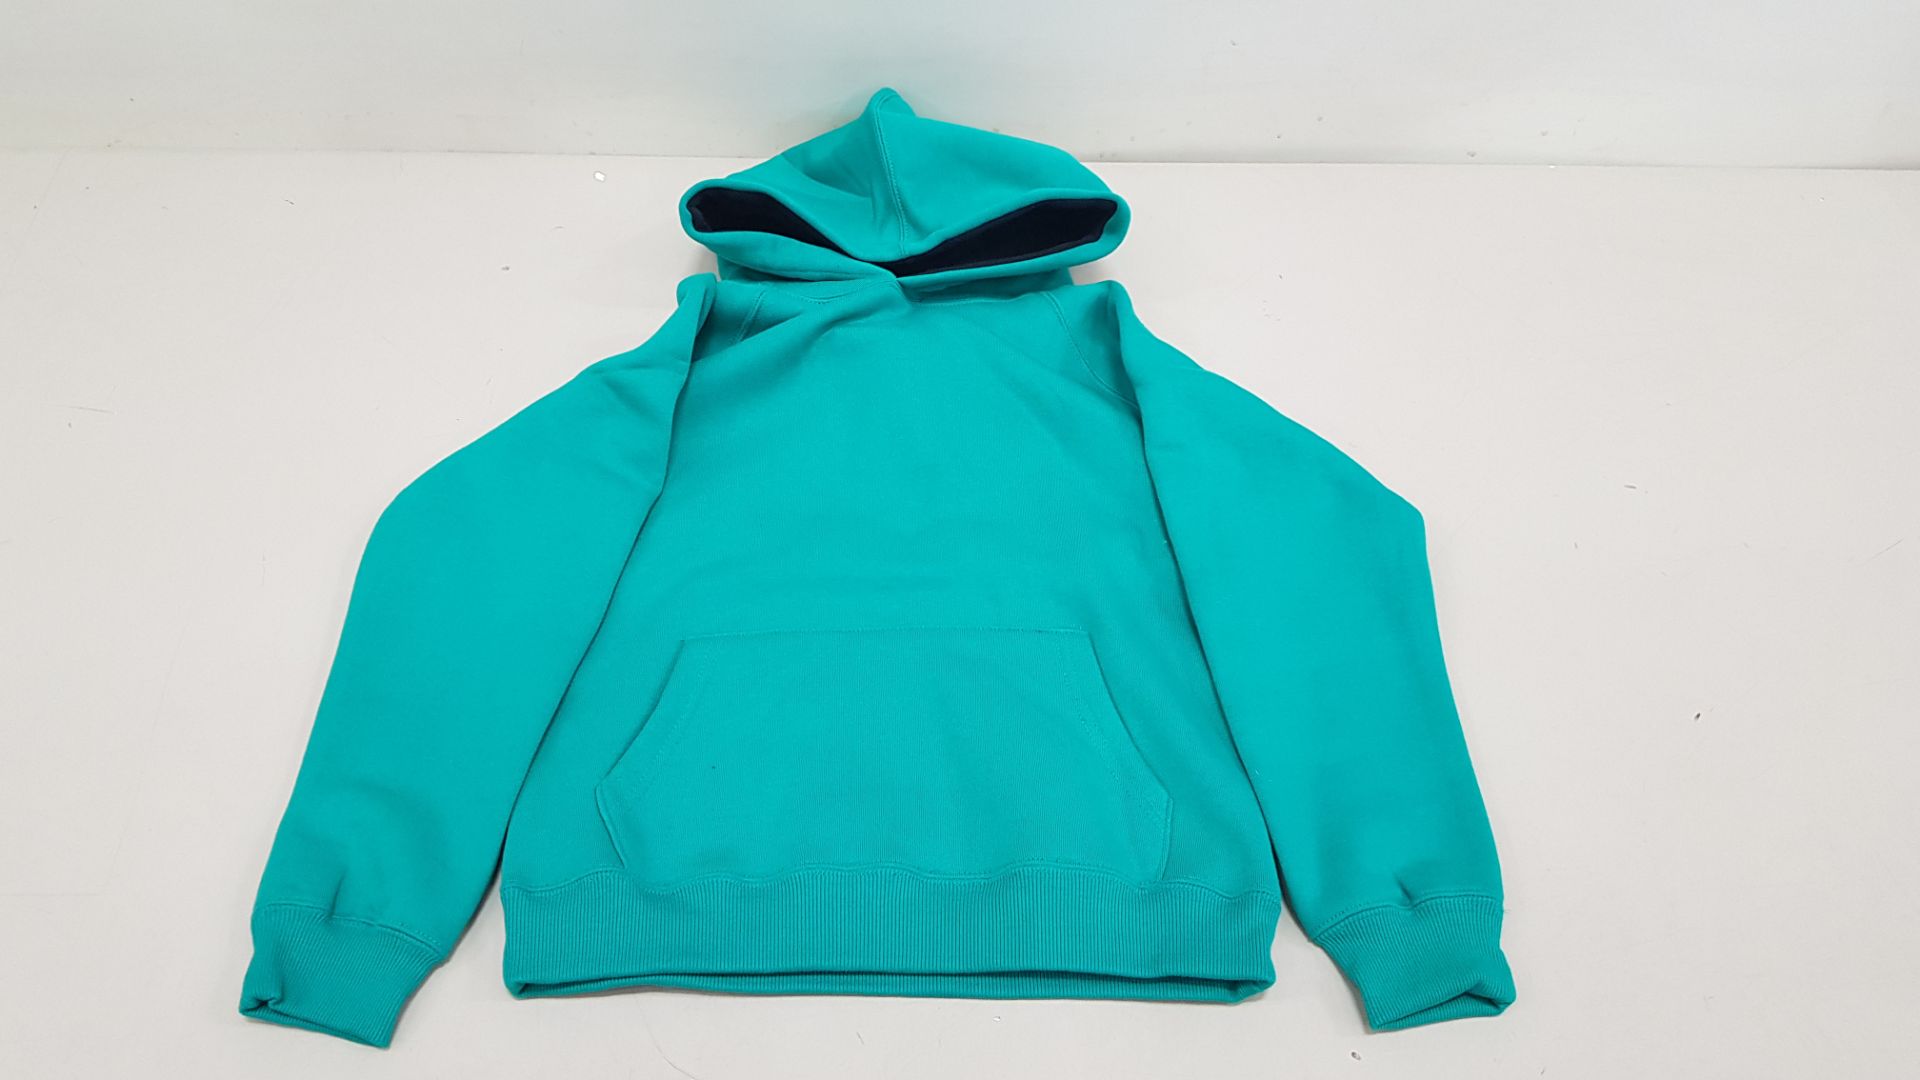 20 X BRAND NEW PAPINI HOODED SWEATSHIRTS IN TEAL / NAVY SIZE 9-10 YEARS